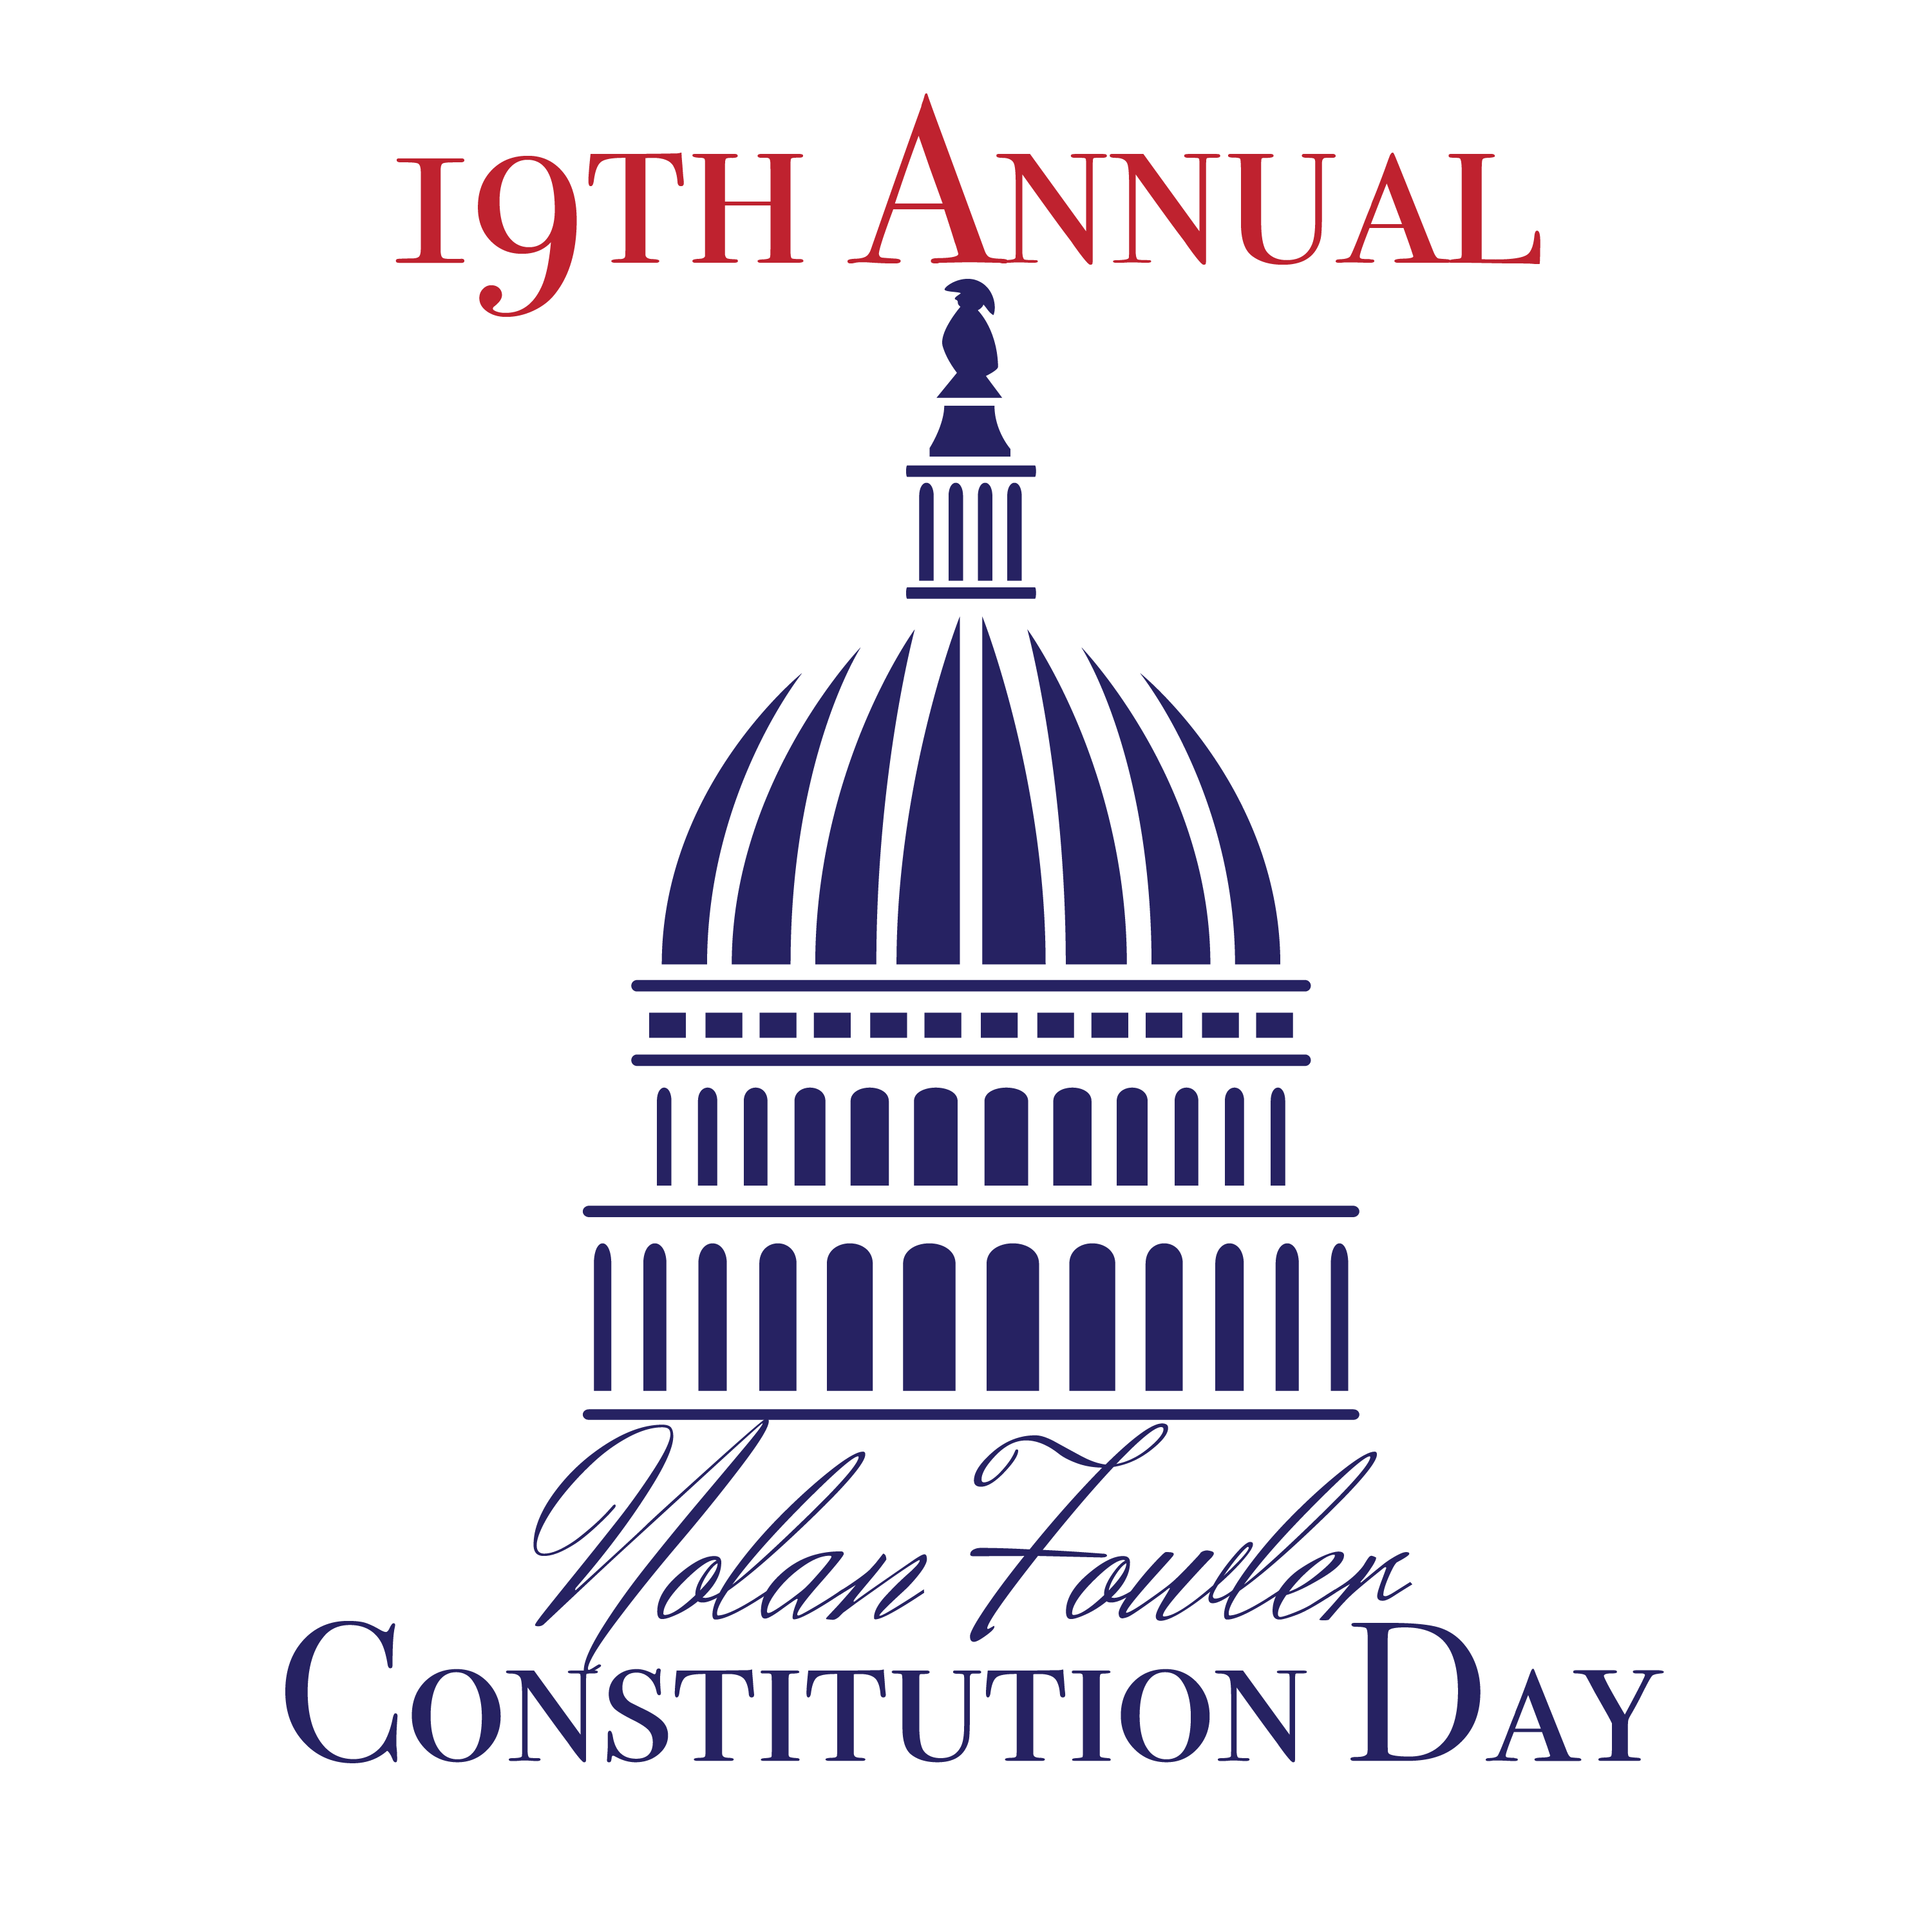 A graphic of the U.S. Capitol cupola that reads 19th Annual Nolan Fowler Consitution Day